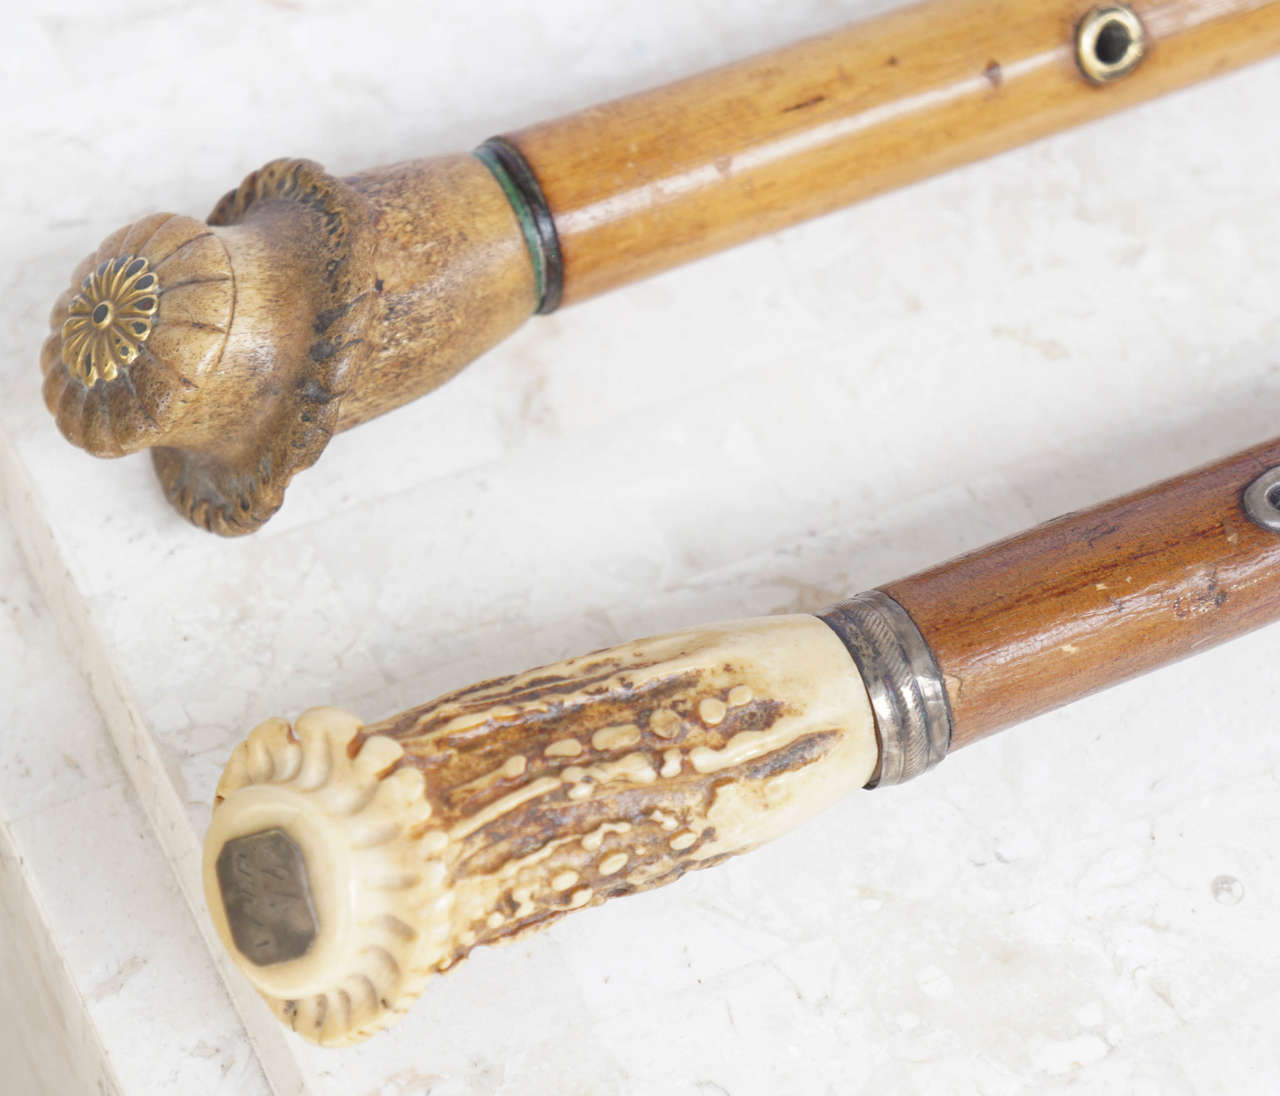 two French walking canes from the 19th century with concealed knives and Staghorn handles 

One has the dagger on the bottom of the cane and is made out of a tree branch, the other is pear wood with a 3